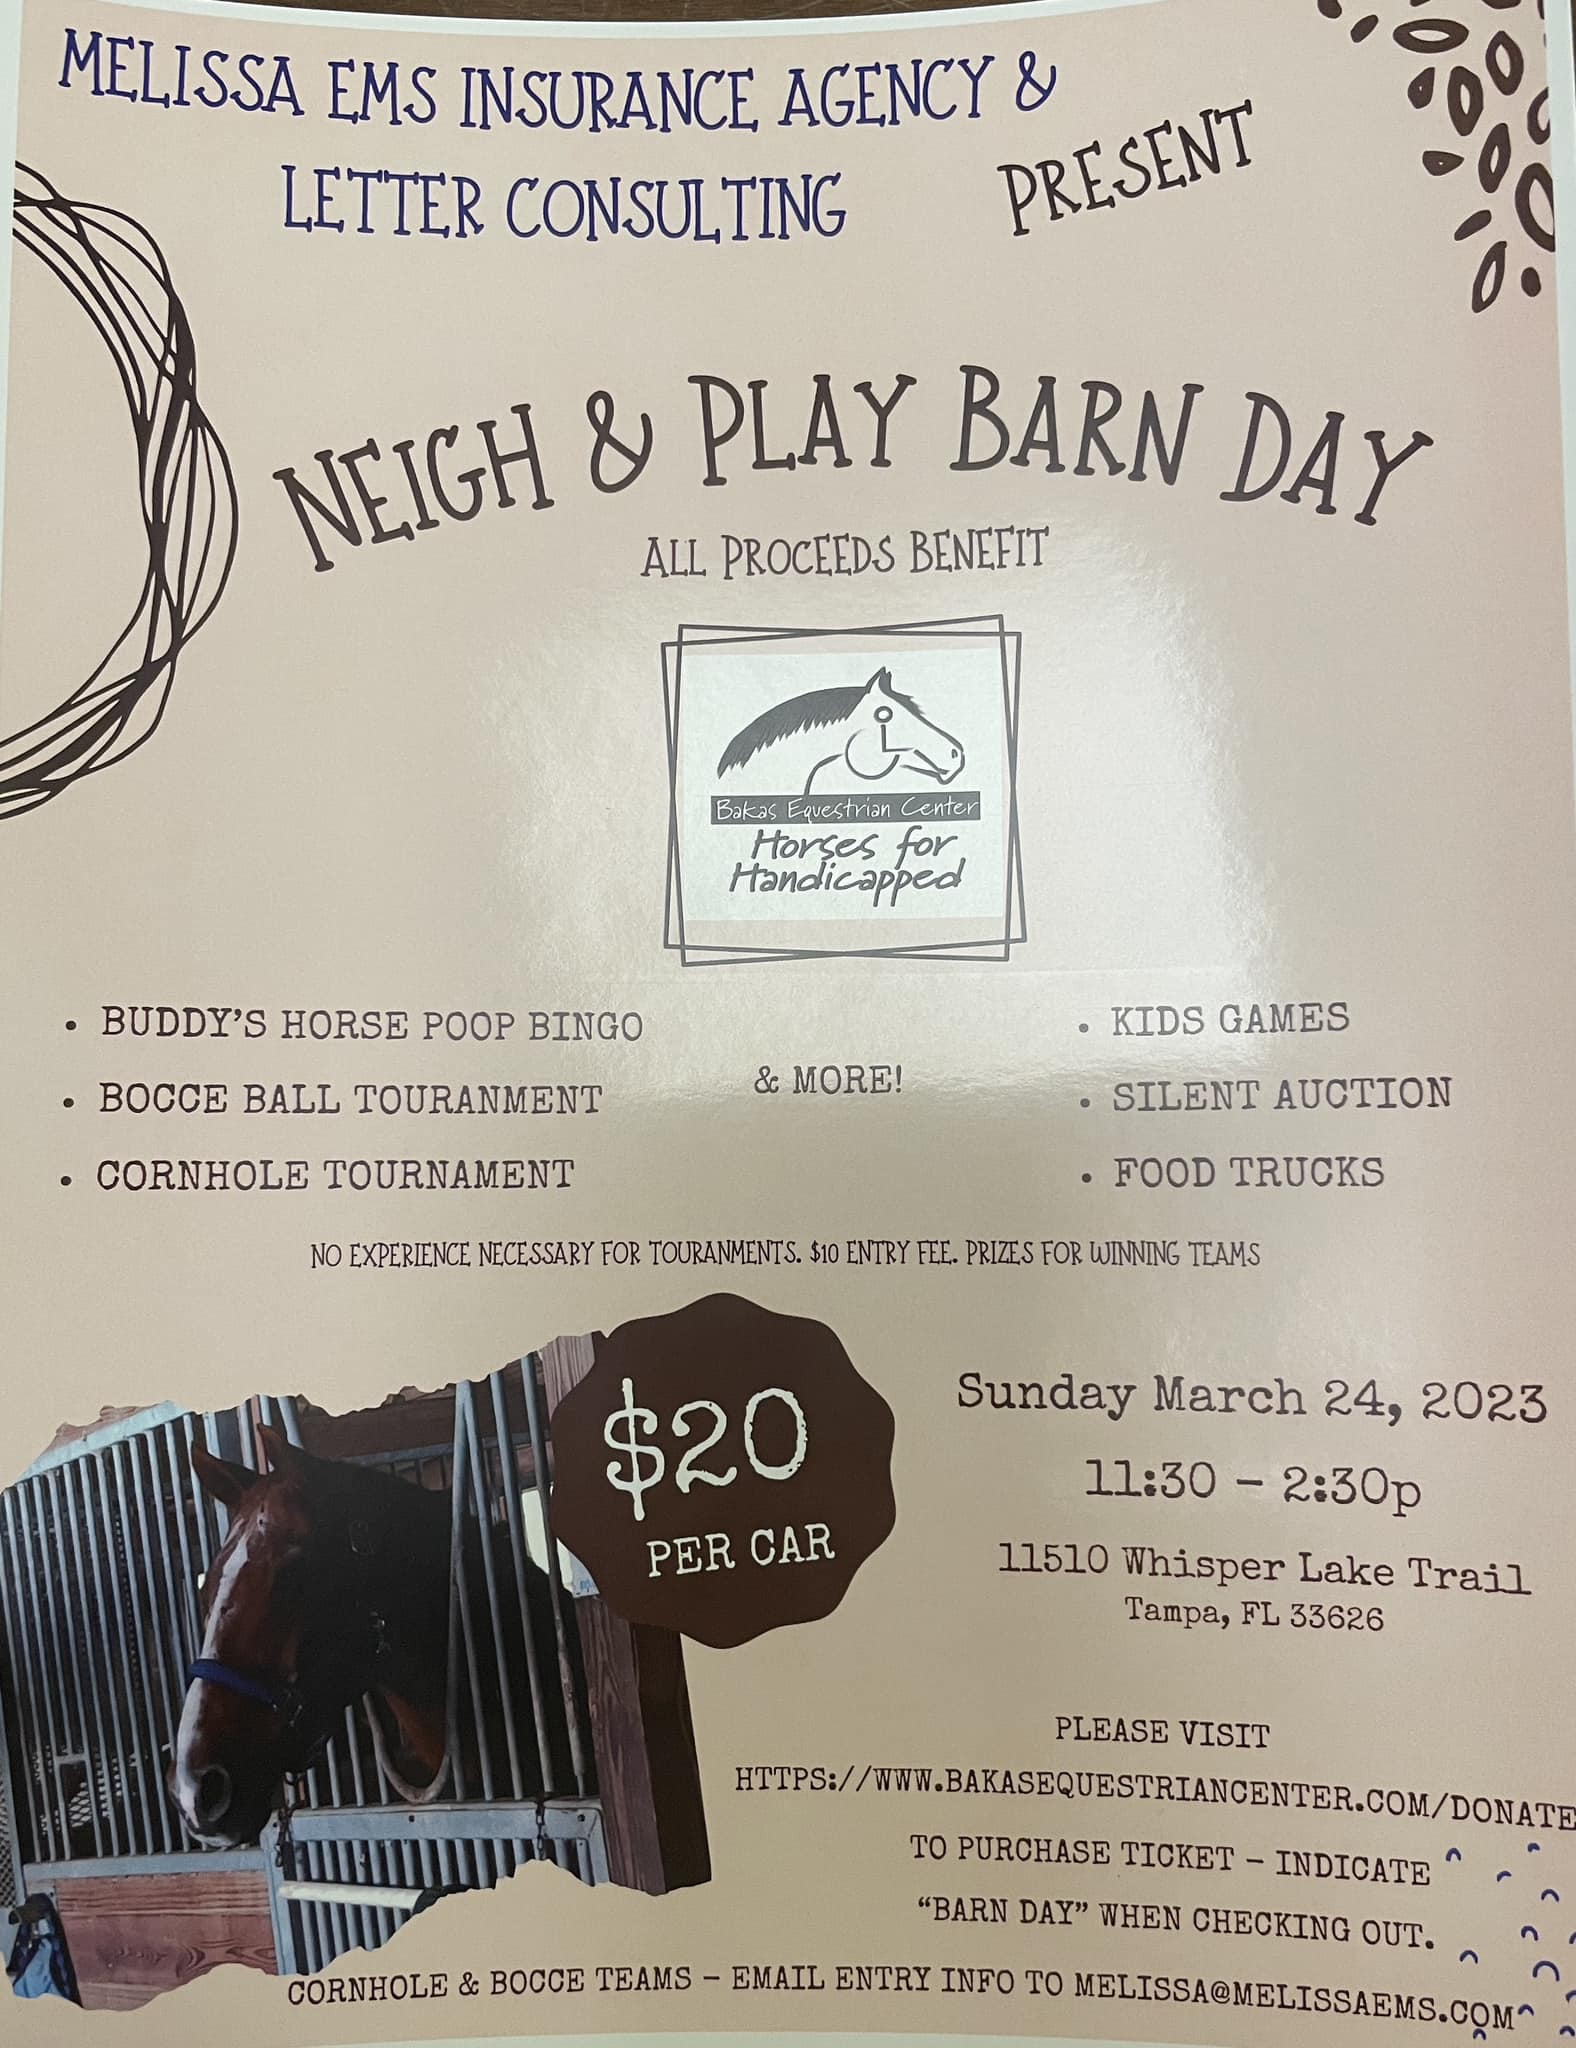 This graphic is for Neigh & Play Barn Day